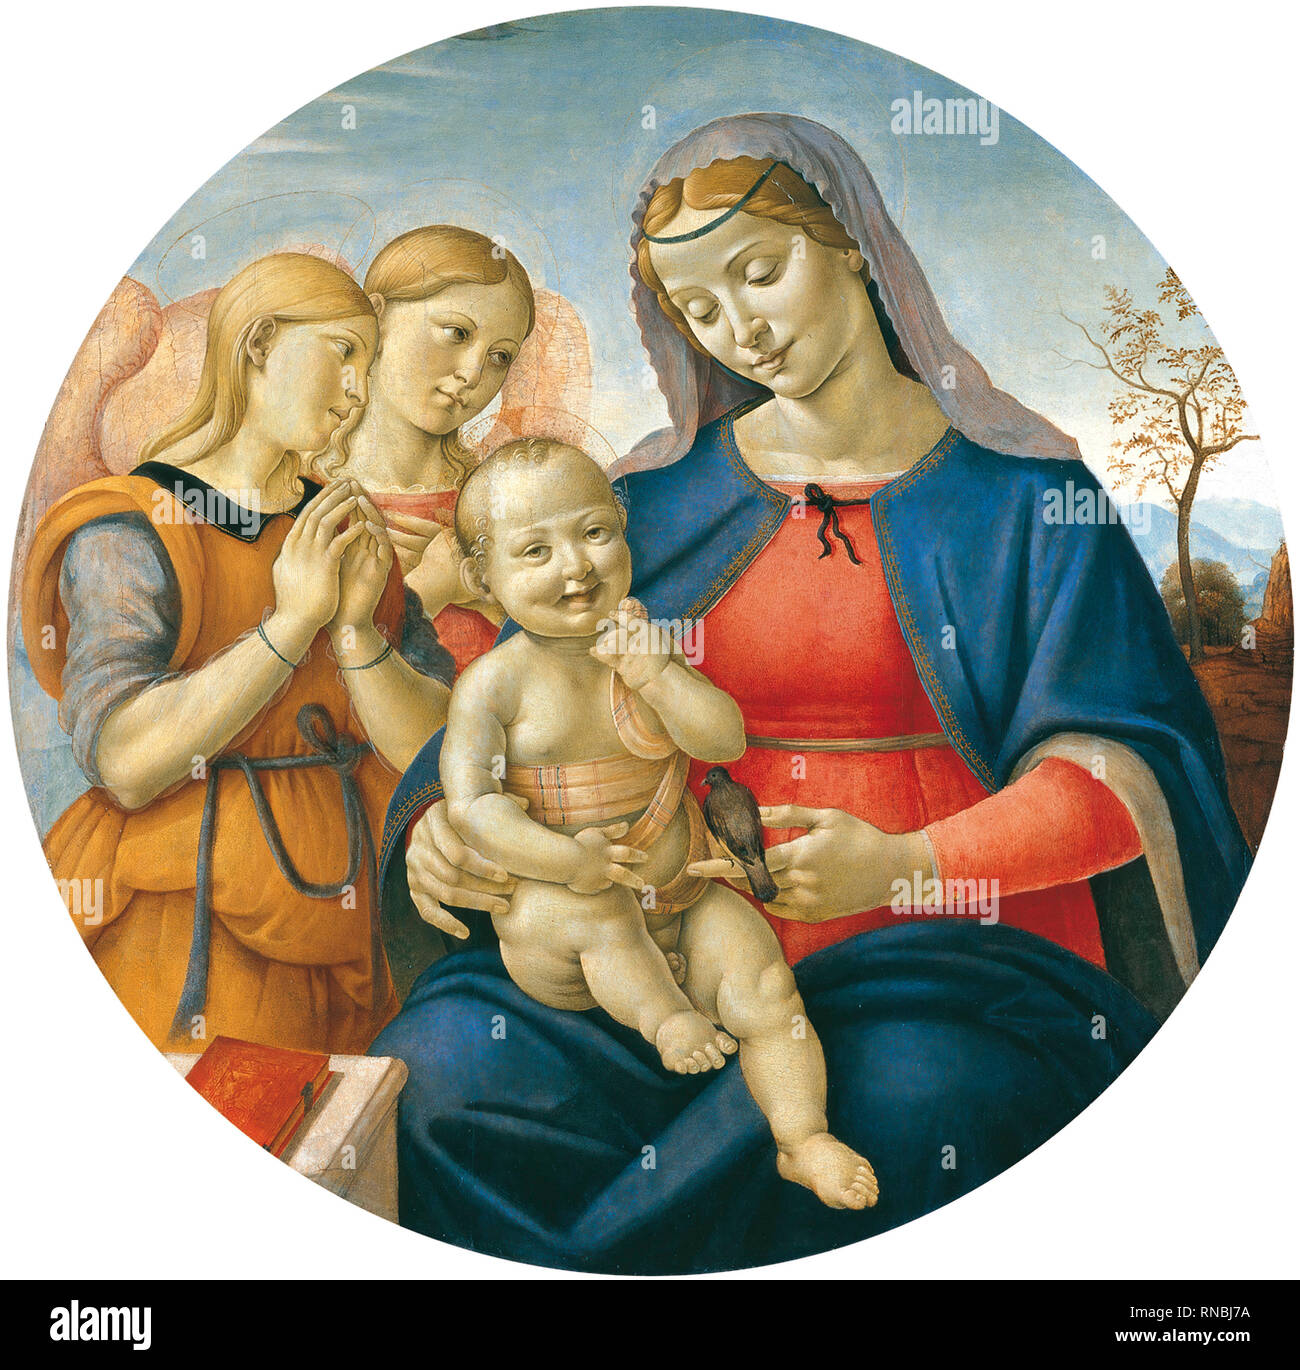 Piero di (attributed to) Cosimo (Florence (?), 1461/62-1521). The Virgin and Child with Angels (ca. 1500 - 1510). Oil and tempera on panel. 78 cm. Museum: Museo Nacional Thyssen-Bornemisza, Madrid. Stock Photo